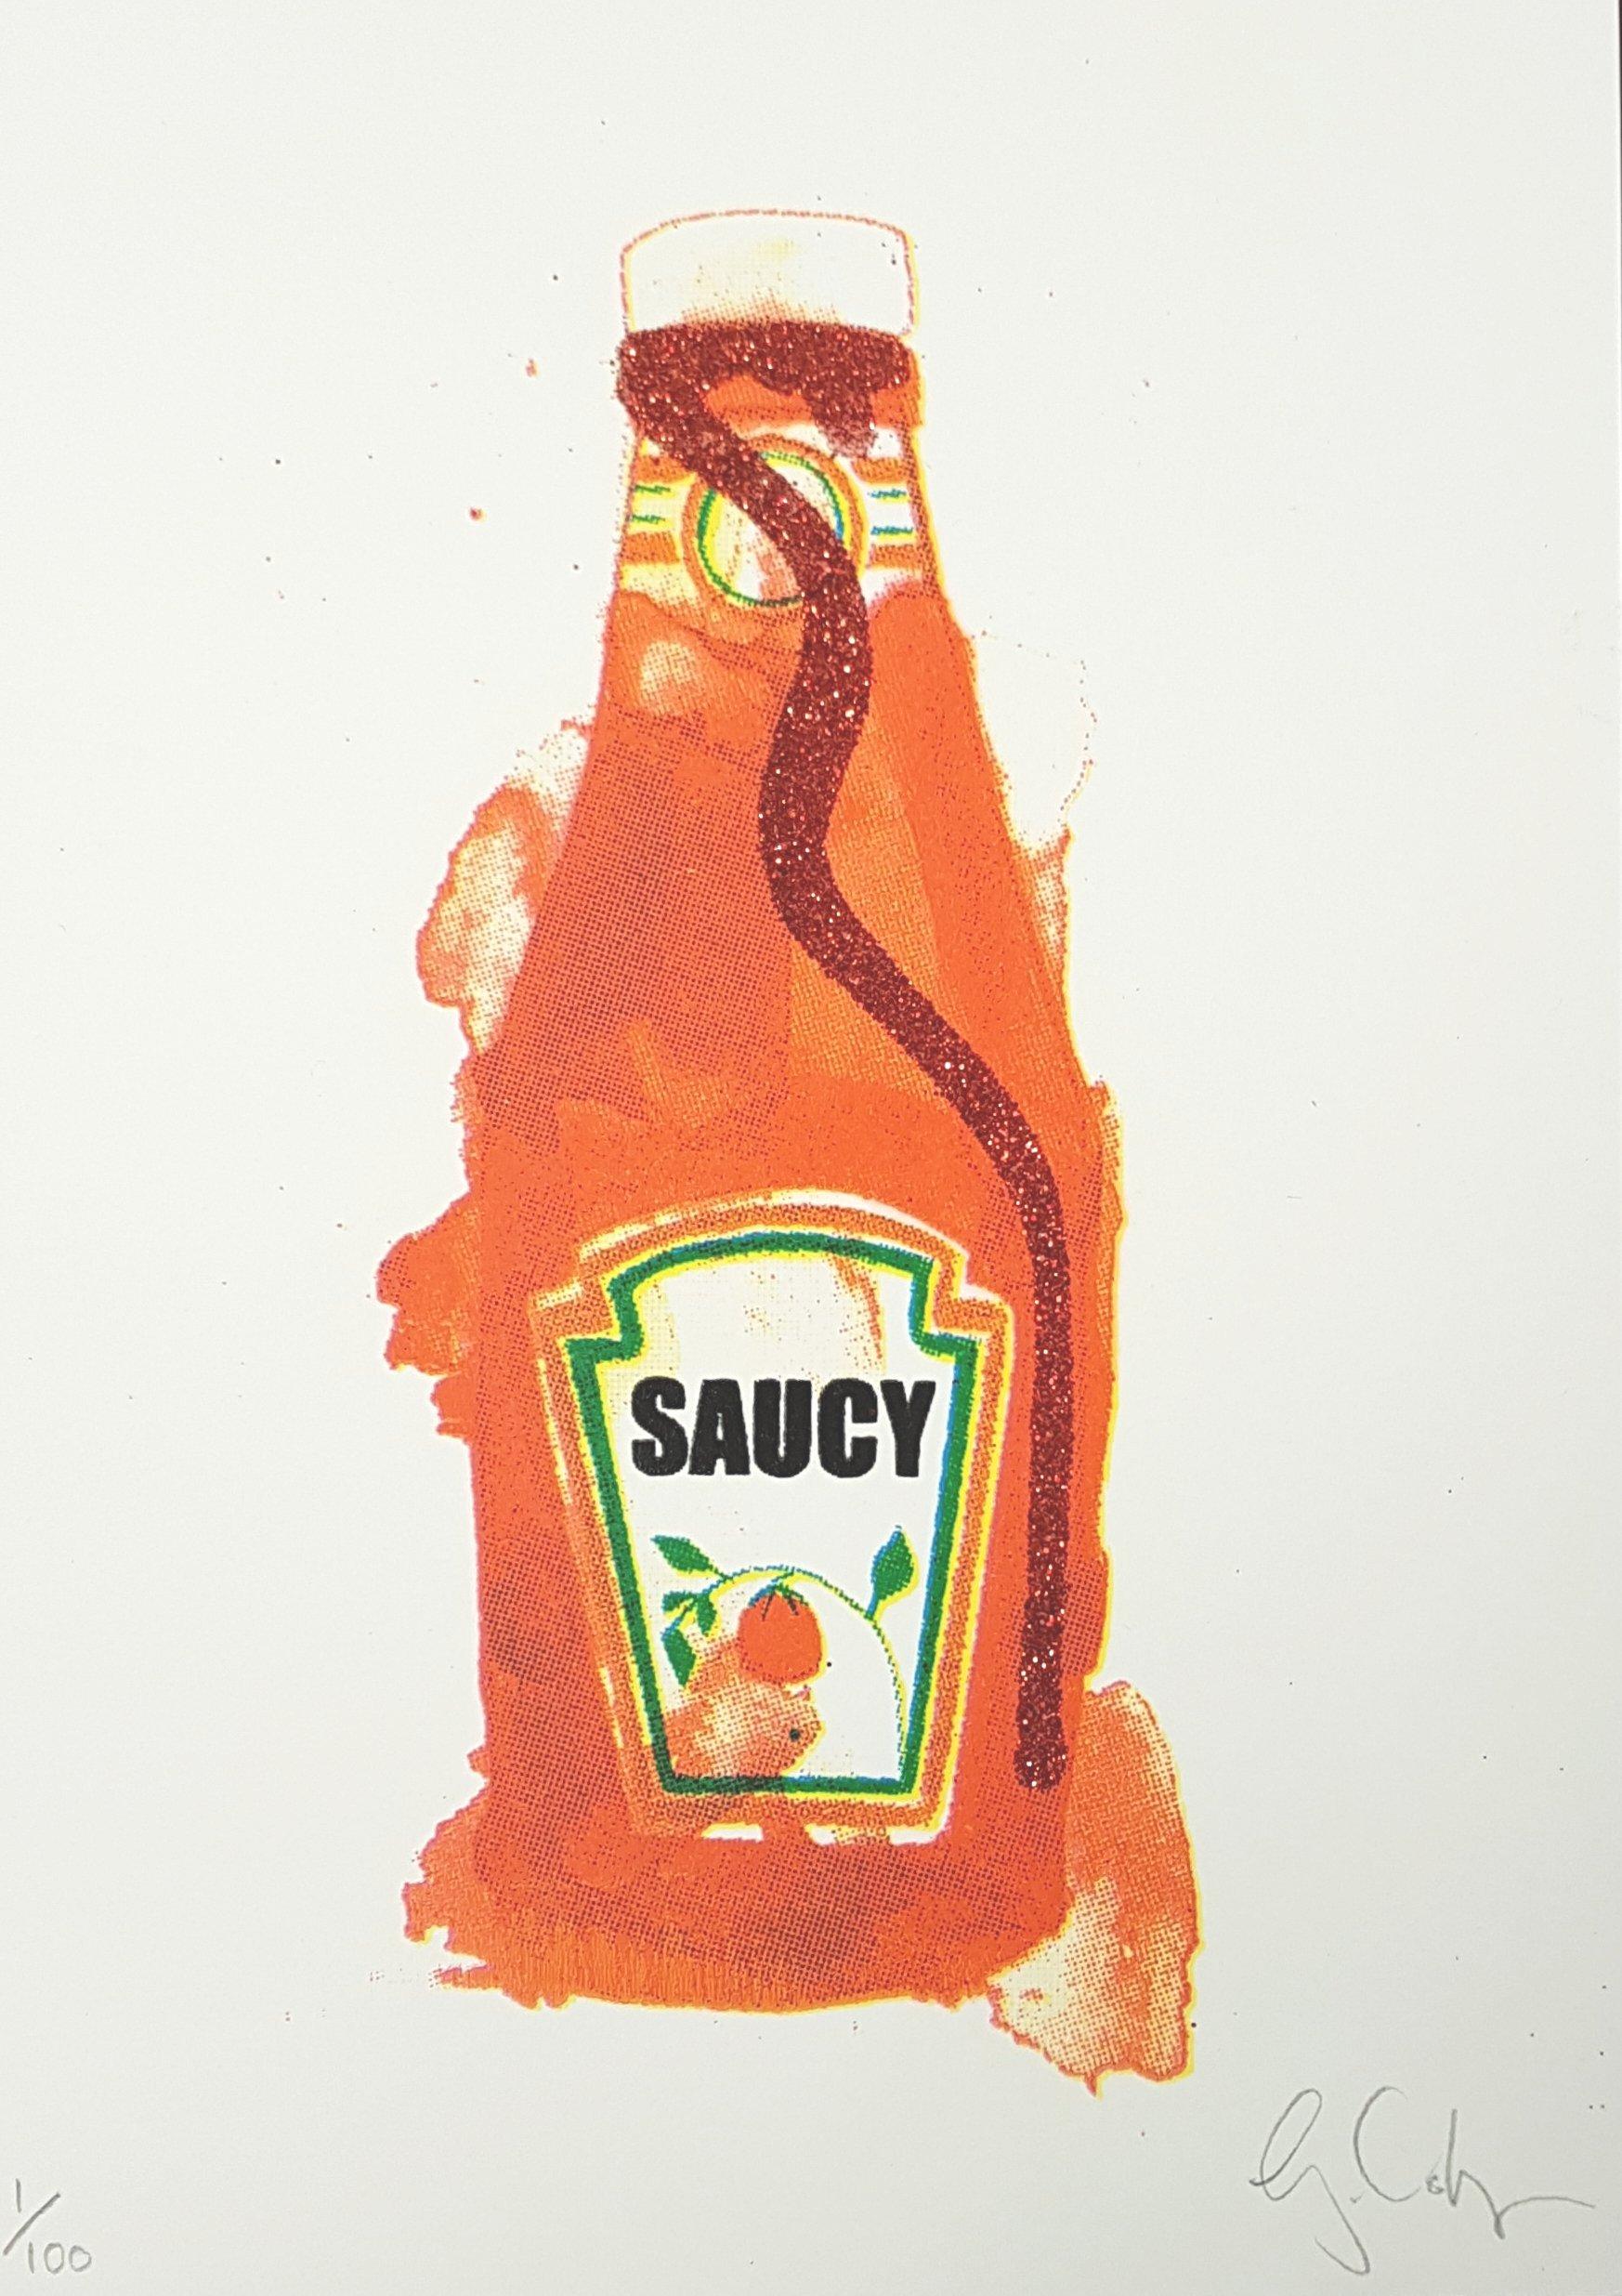 Mini Saucy and Use Me Mini diptych - Print by Gavin Dobson